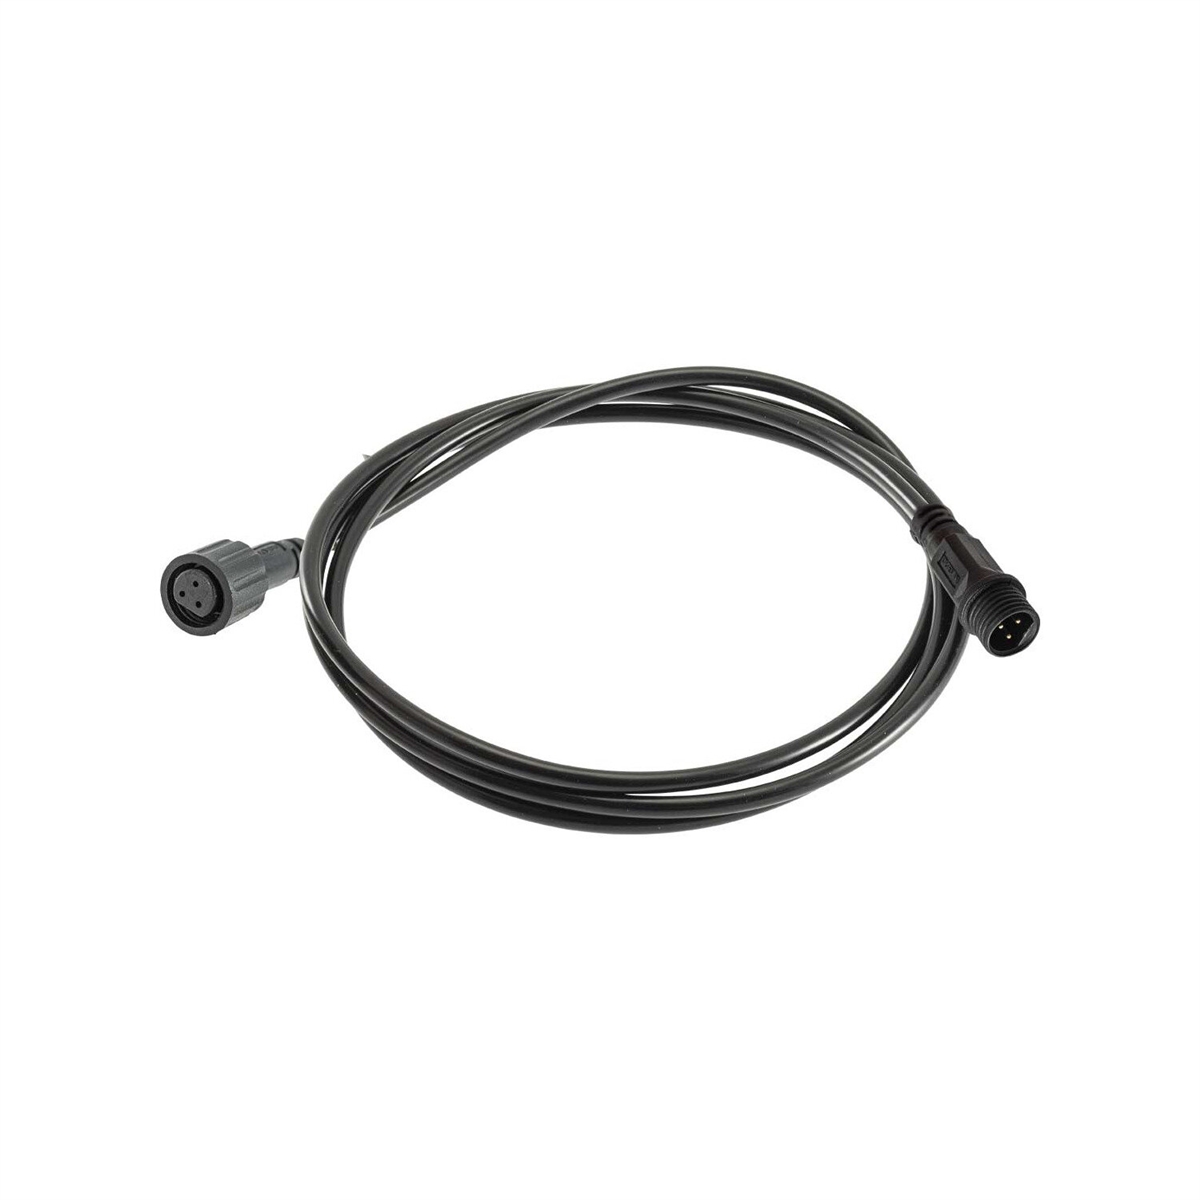 Speed Sensor Extension Cable 50cm